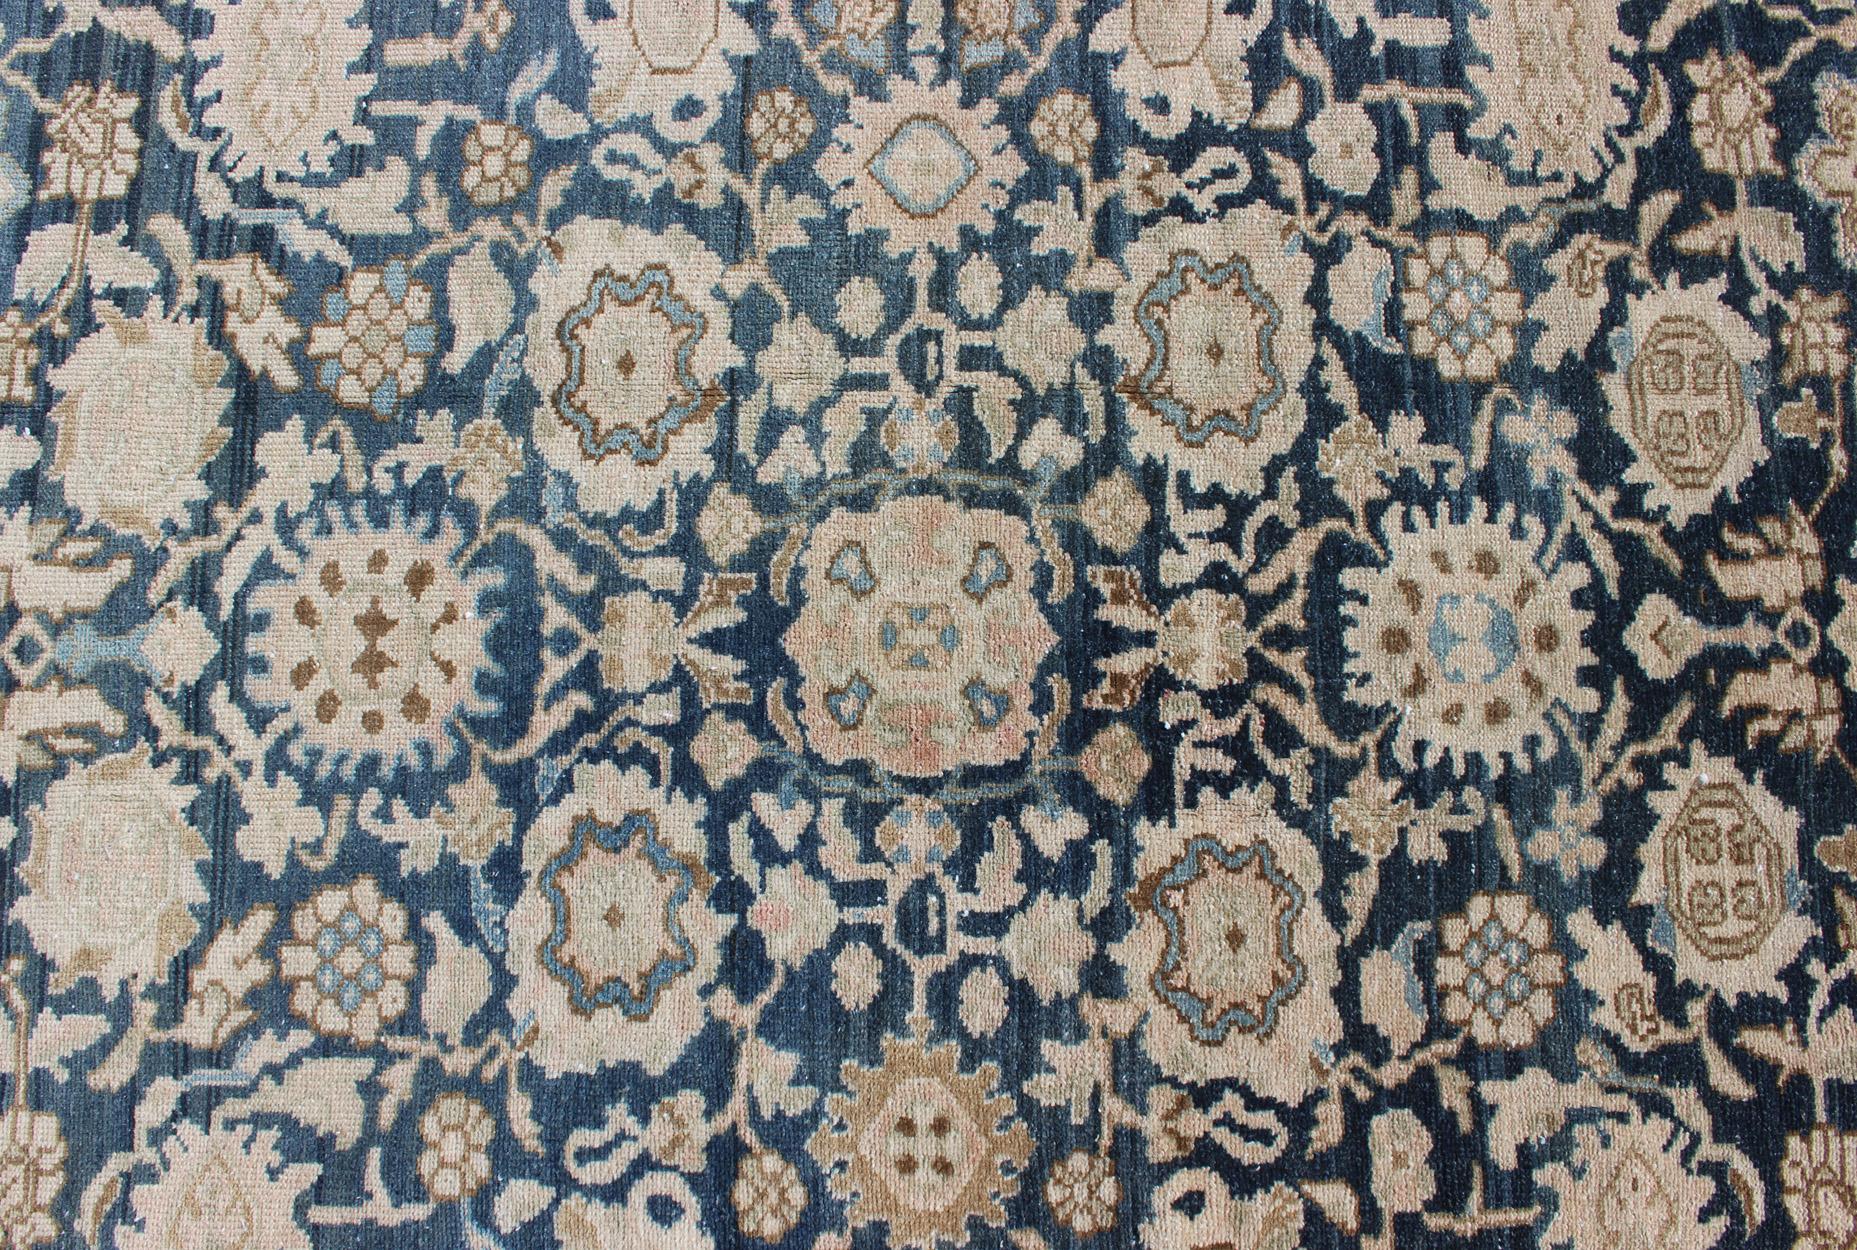 All-Over Blue Floral Persian Hamadan Rug in Navy Blue and Earthy Tones For Sale 8